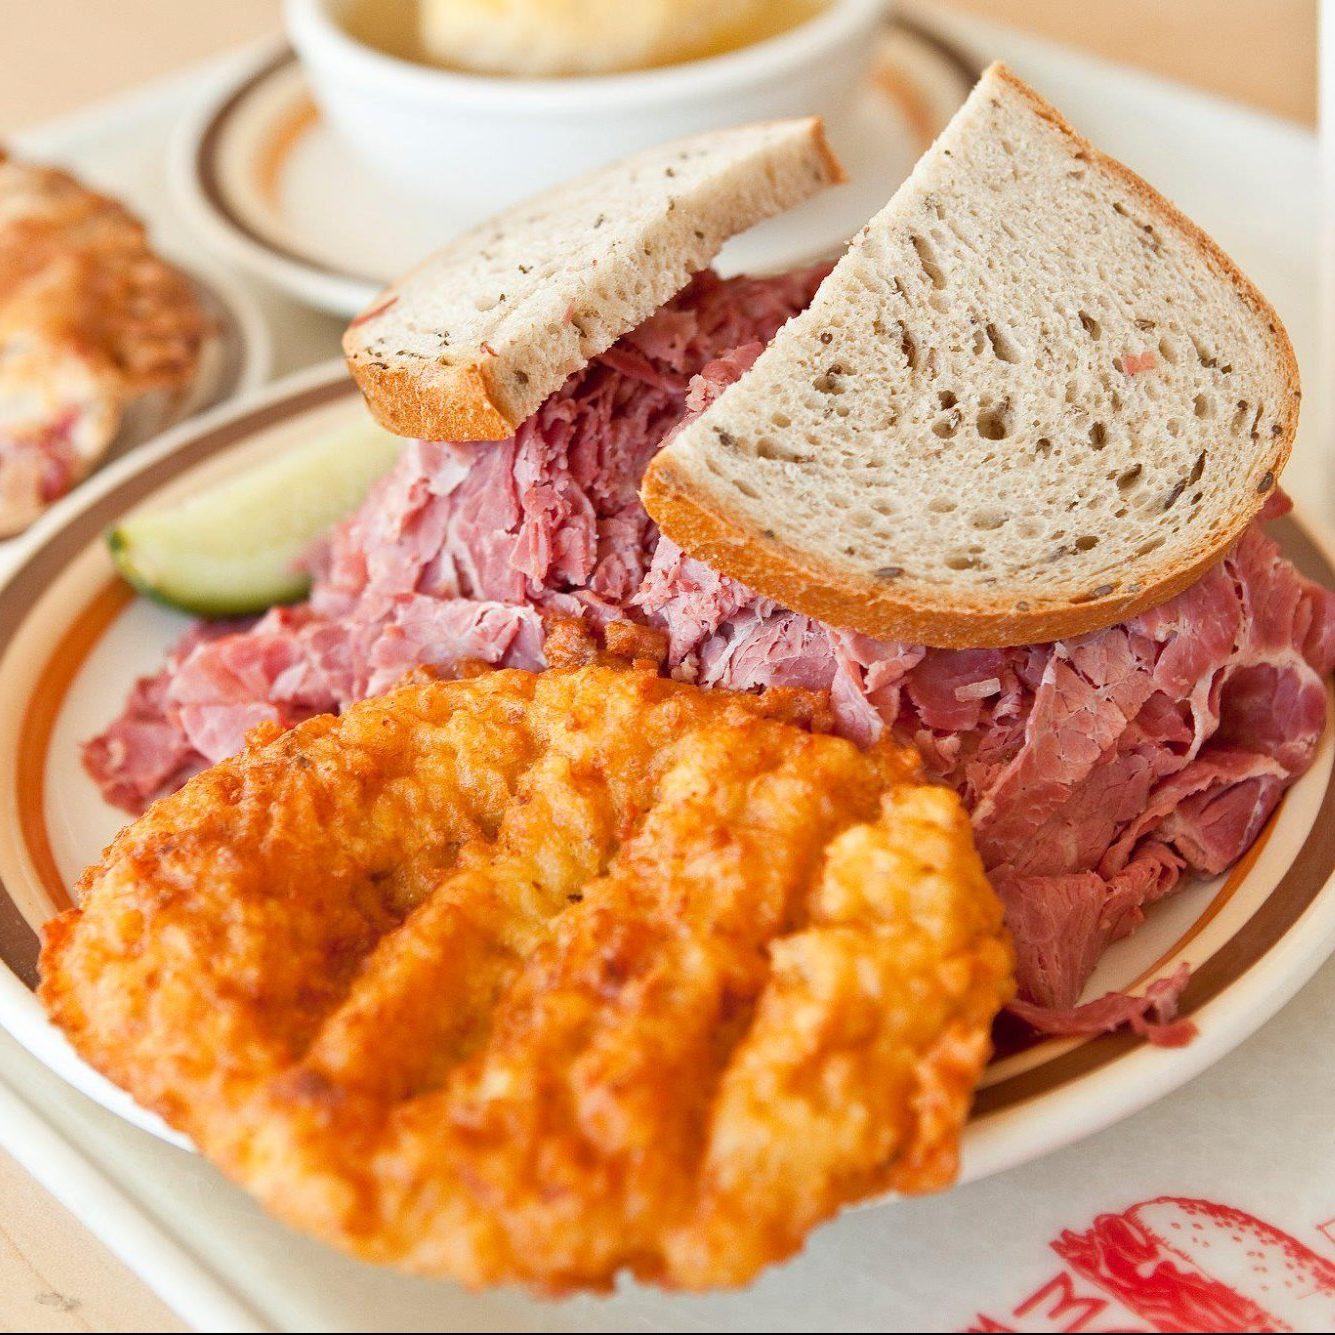 Corned Beef On Rye from Manny's Cafeteria & Delicatessen, Chicago